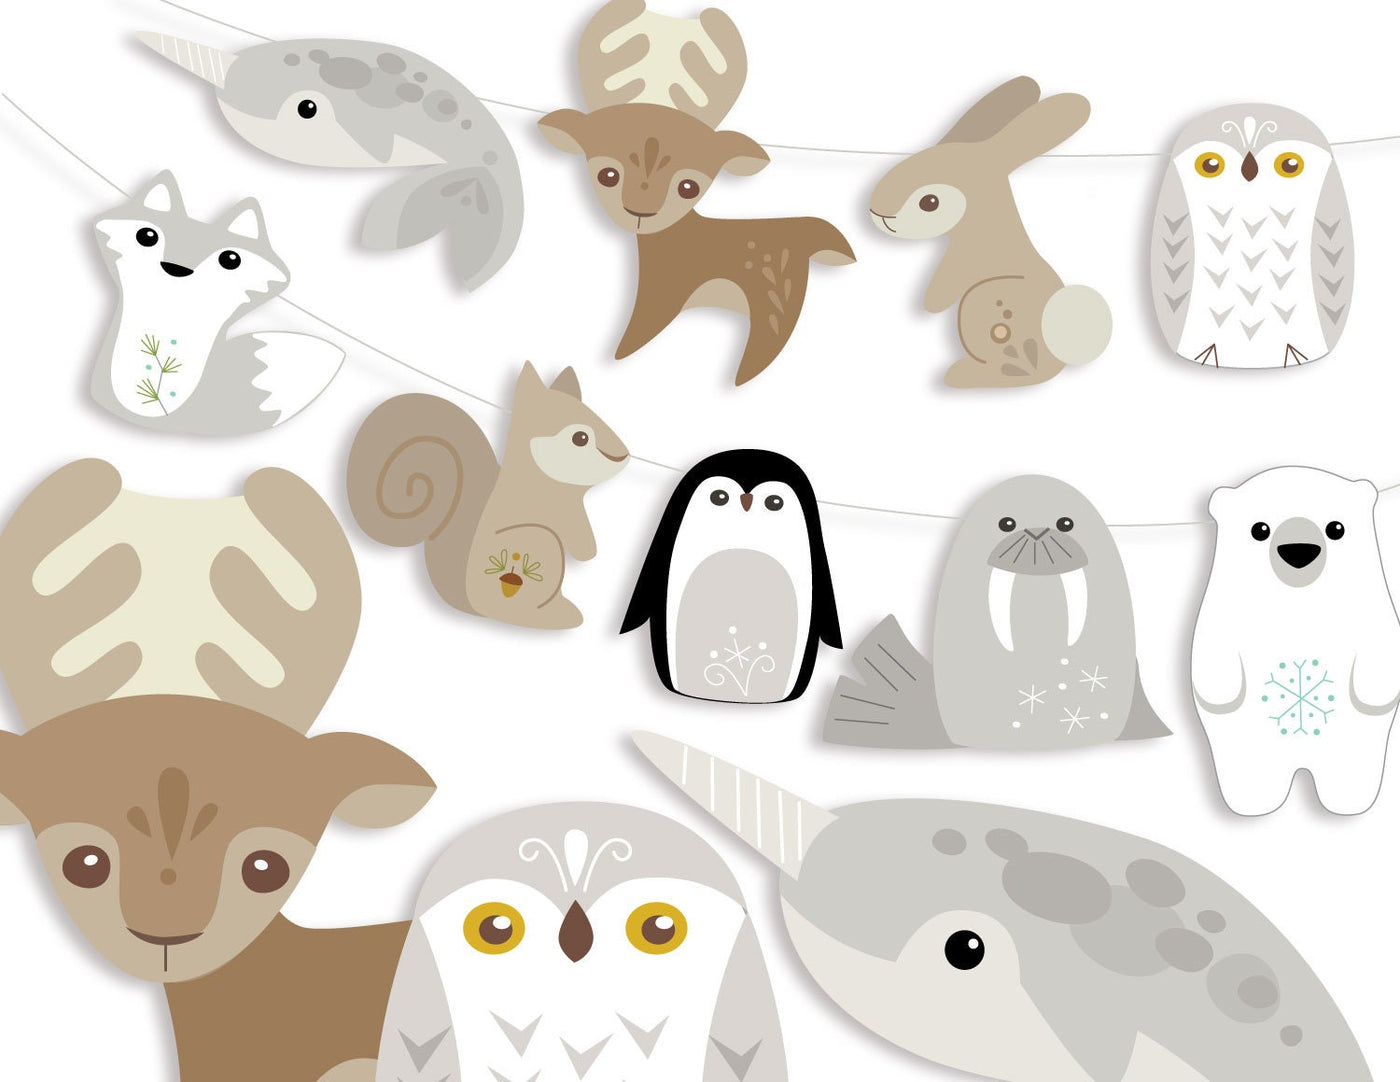 Winter Animals printable/ SVG for Christmas and Holiday party decor and crafts